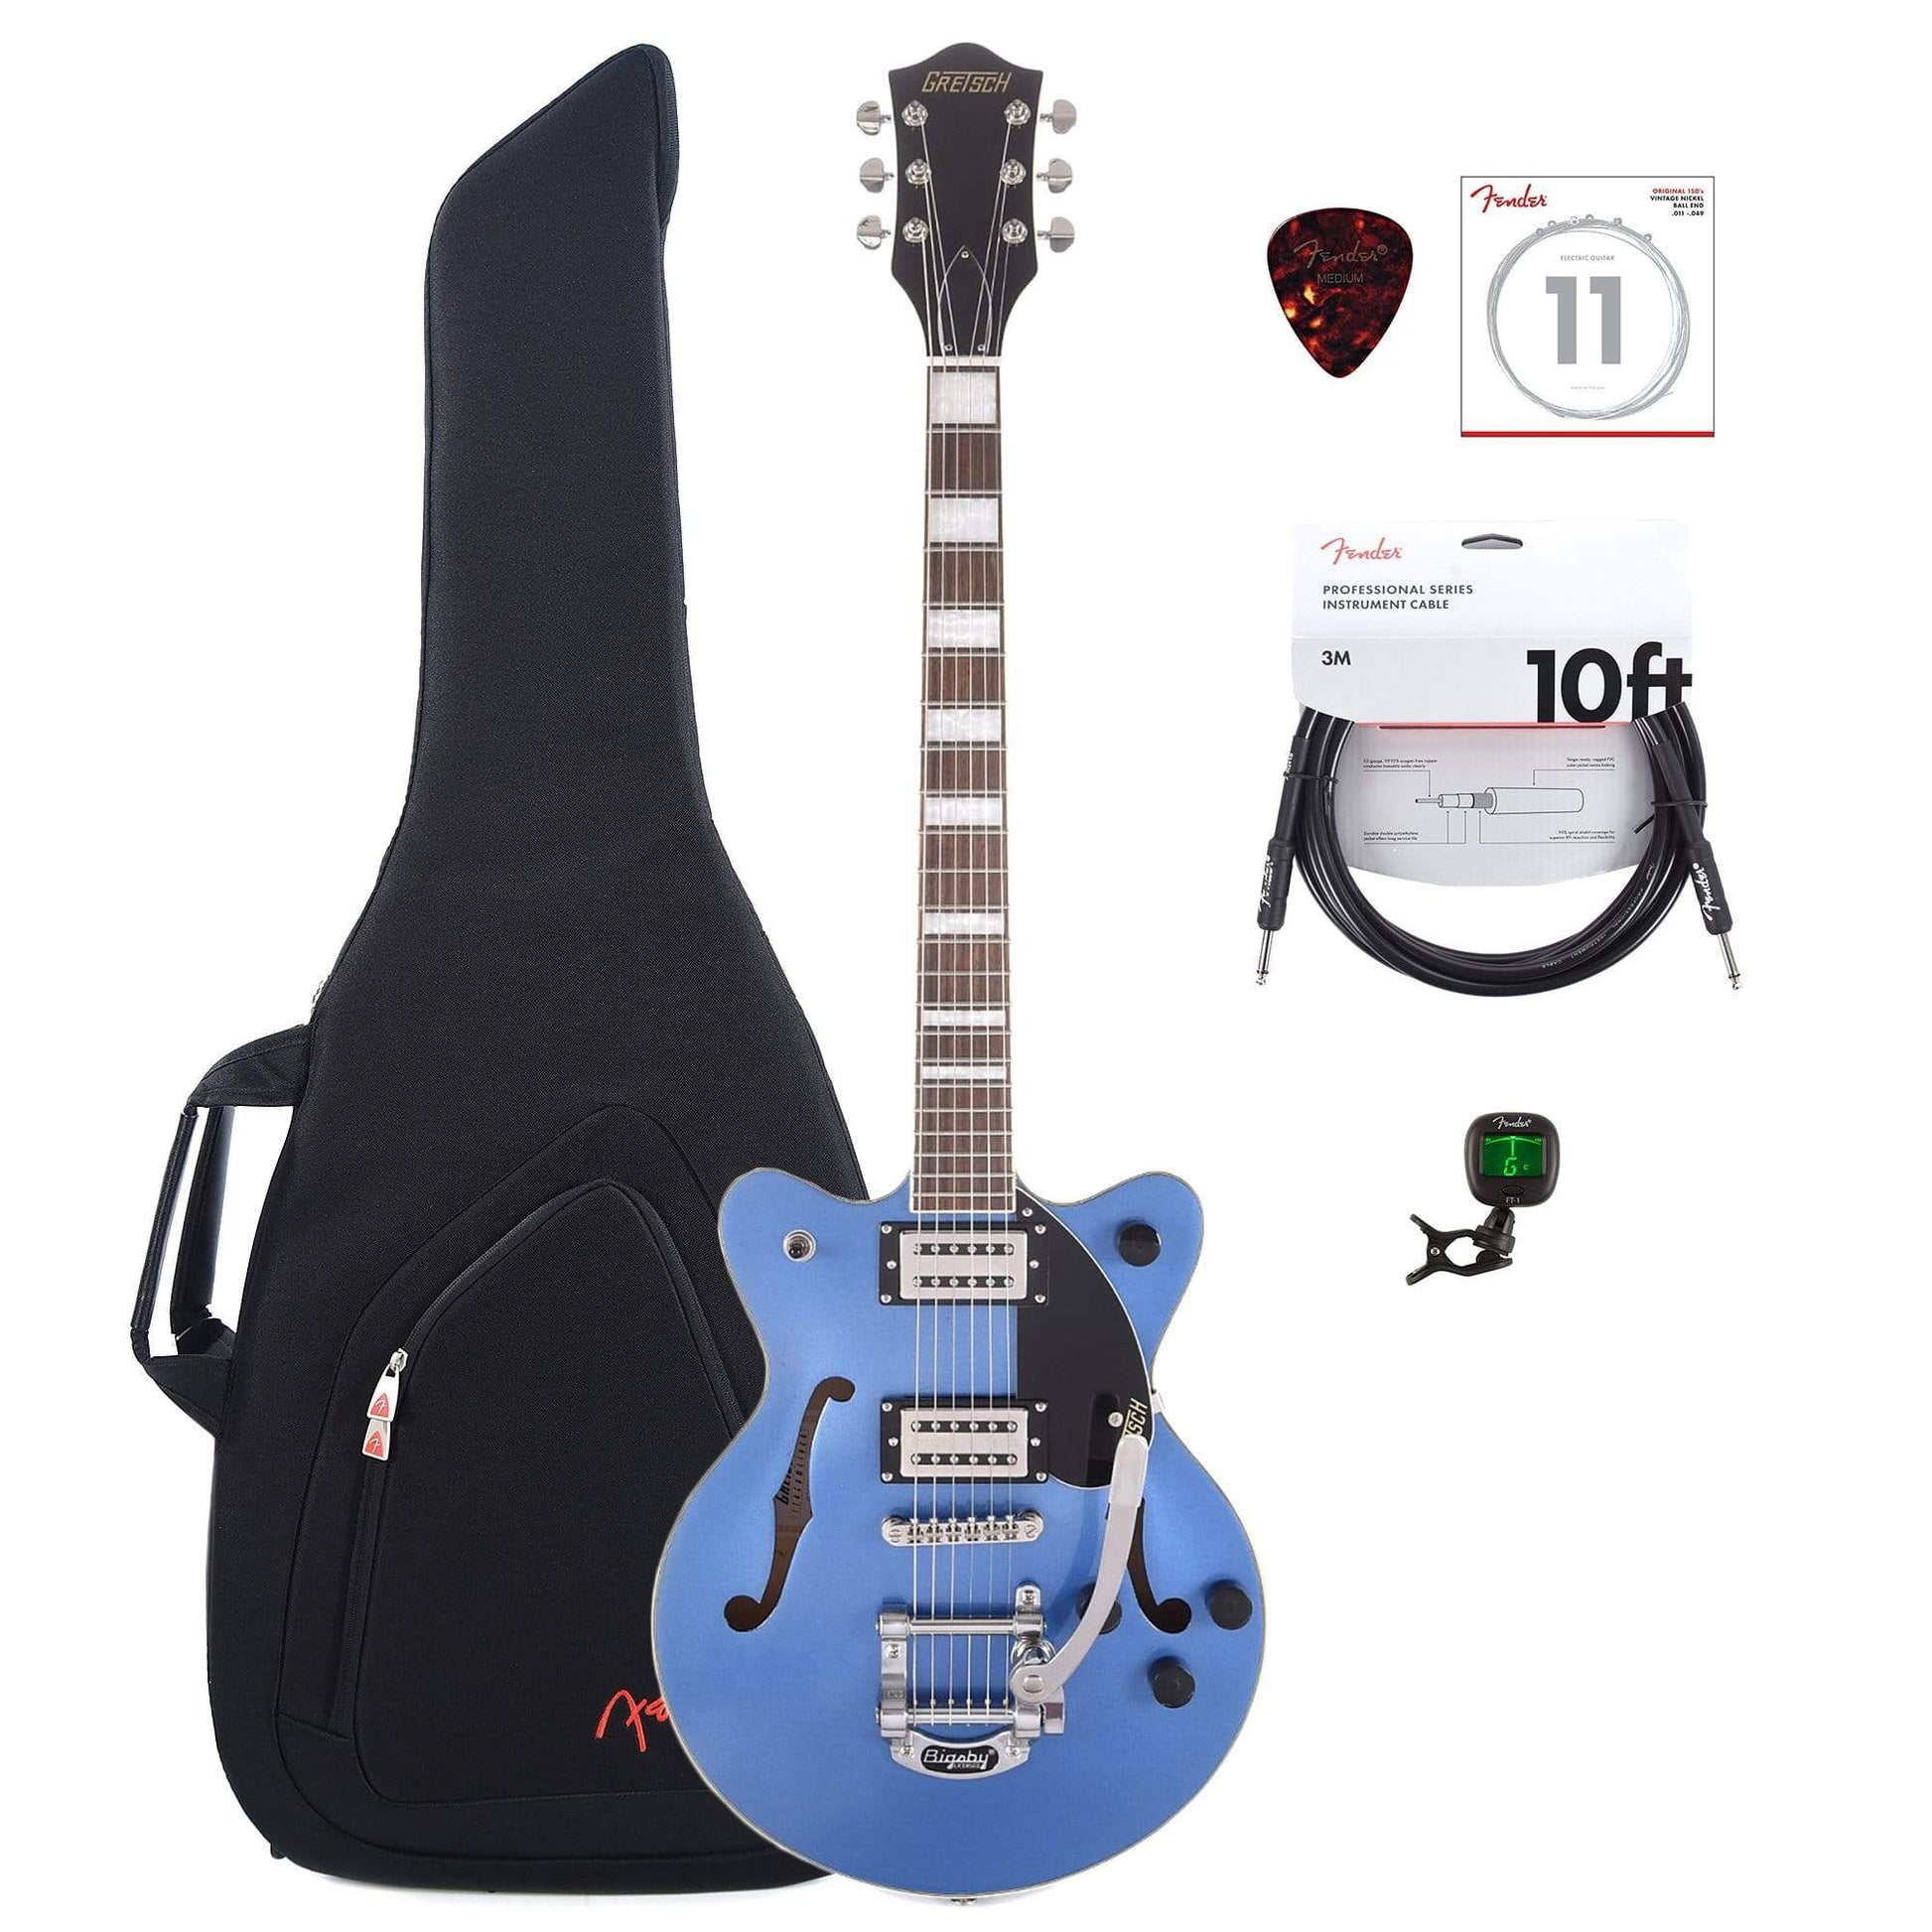 Gretsch G2655T Streamliner Center Block Jr. Fairlane Blue w/Bigsby & Broad'Tron Pickups w/Gig Bag, Tuner, (1) Cable, Picks and Strings Bundle Electric Guitars / Semi-Hollow